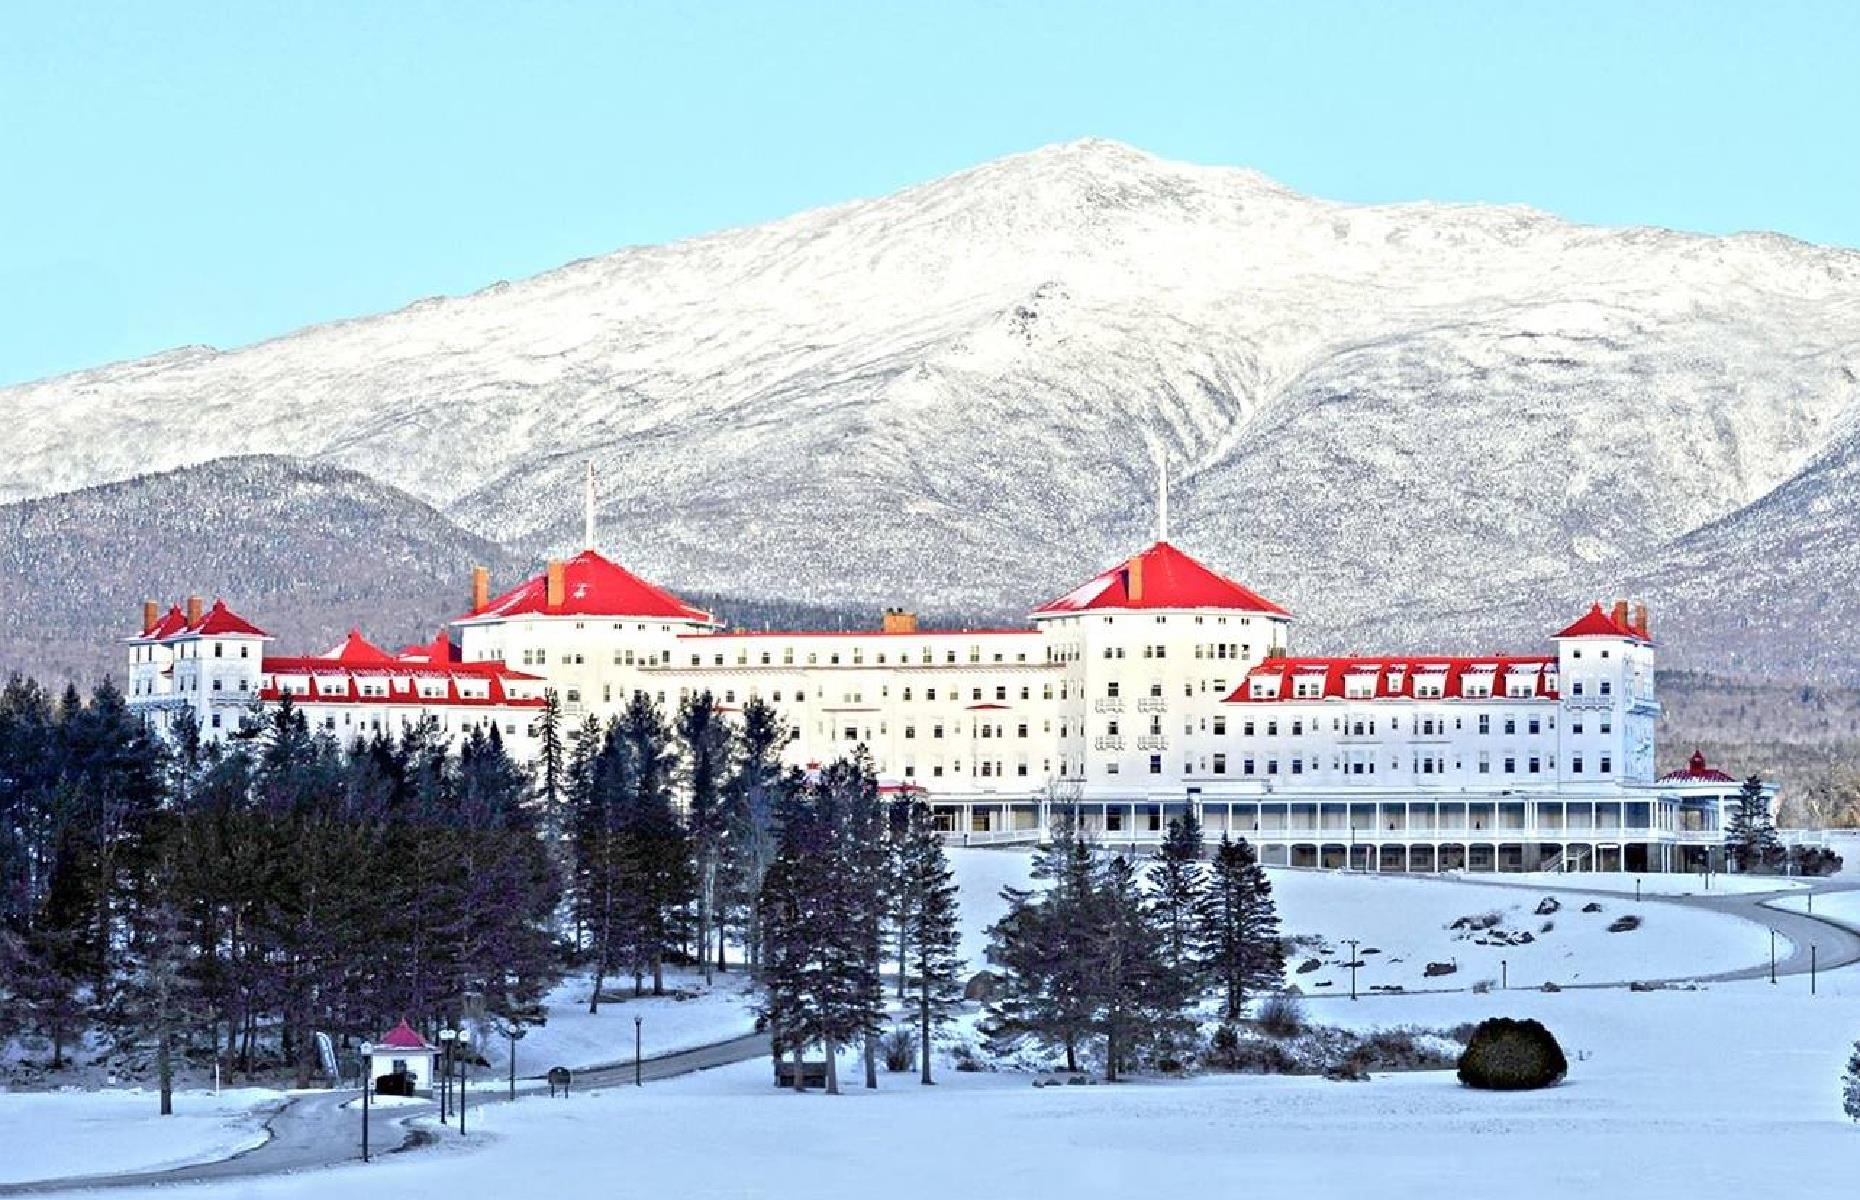 <p>The lofty <a href="https://www.omnihotels.com/hotels/bretton-woods-mount-washington">Omni Mount Washington</a> occupies a breathtaking spot in the White Mountains – and its own grandeur more than matches up to the beautiful setting. The sprawling resort is close to the Bretton Woods ski slopes and hosts a championship golf course and a massive spa where guests can gaze upon the peaks after a massage or scrub. More adventurous visitors can typically try out the <a href="https://www.omnihotels.com/hotels/bretton-woods-mount-washington/canopy-tour/frequently-asked-questions">“canopy tour”</a>, a series of zip-lines, sky bridges and platforms offering unbeatable mountain views. </p>